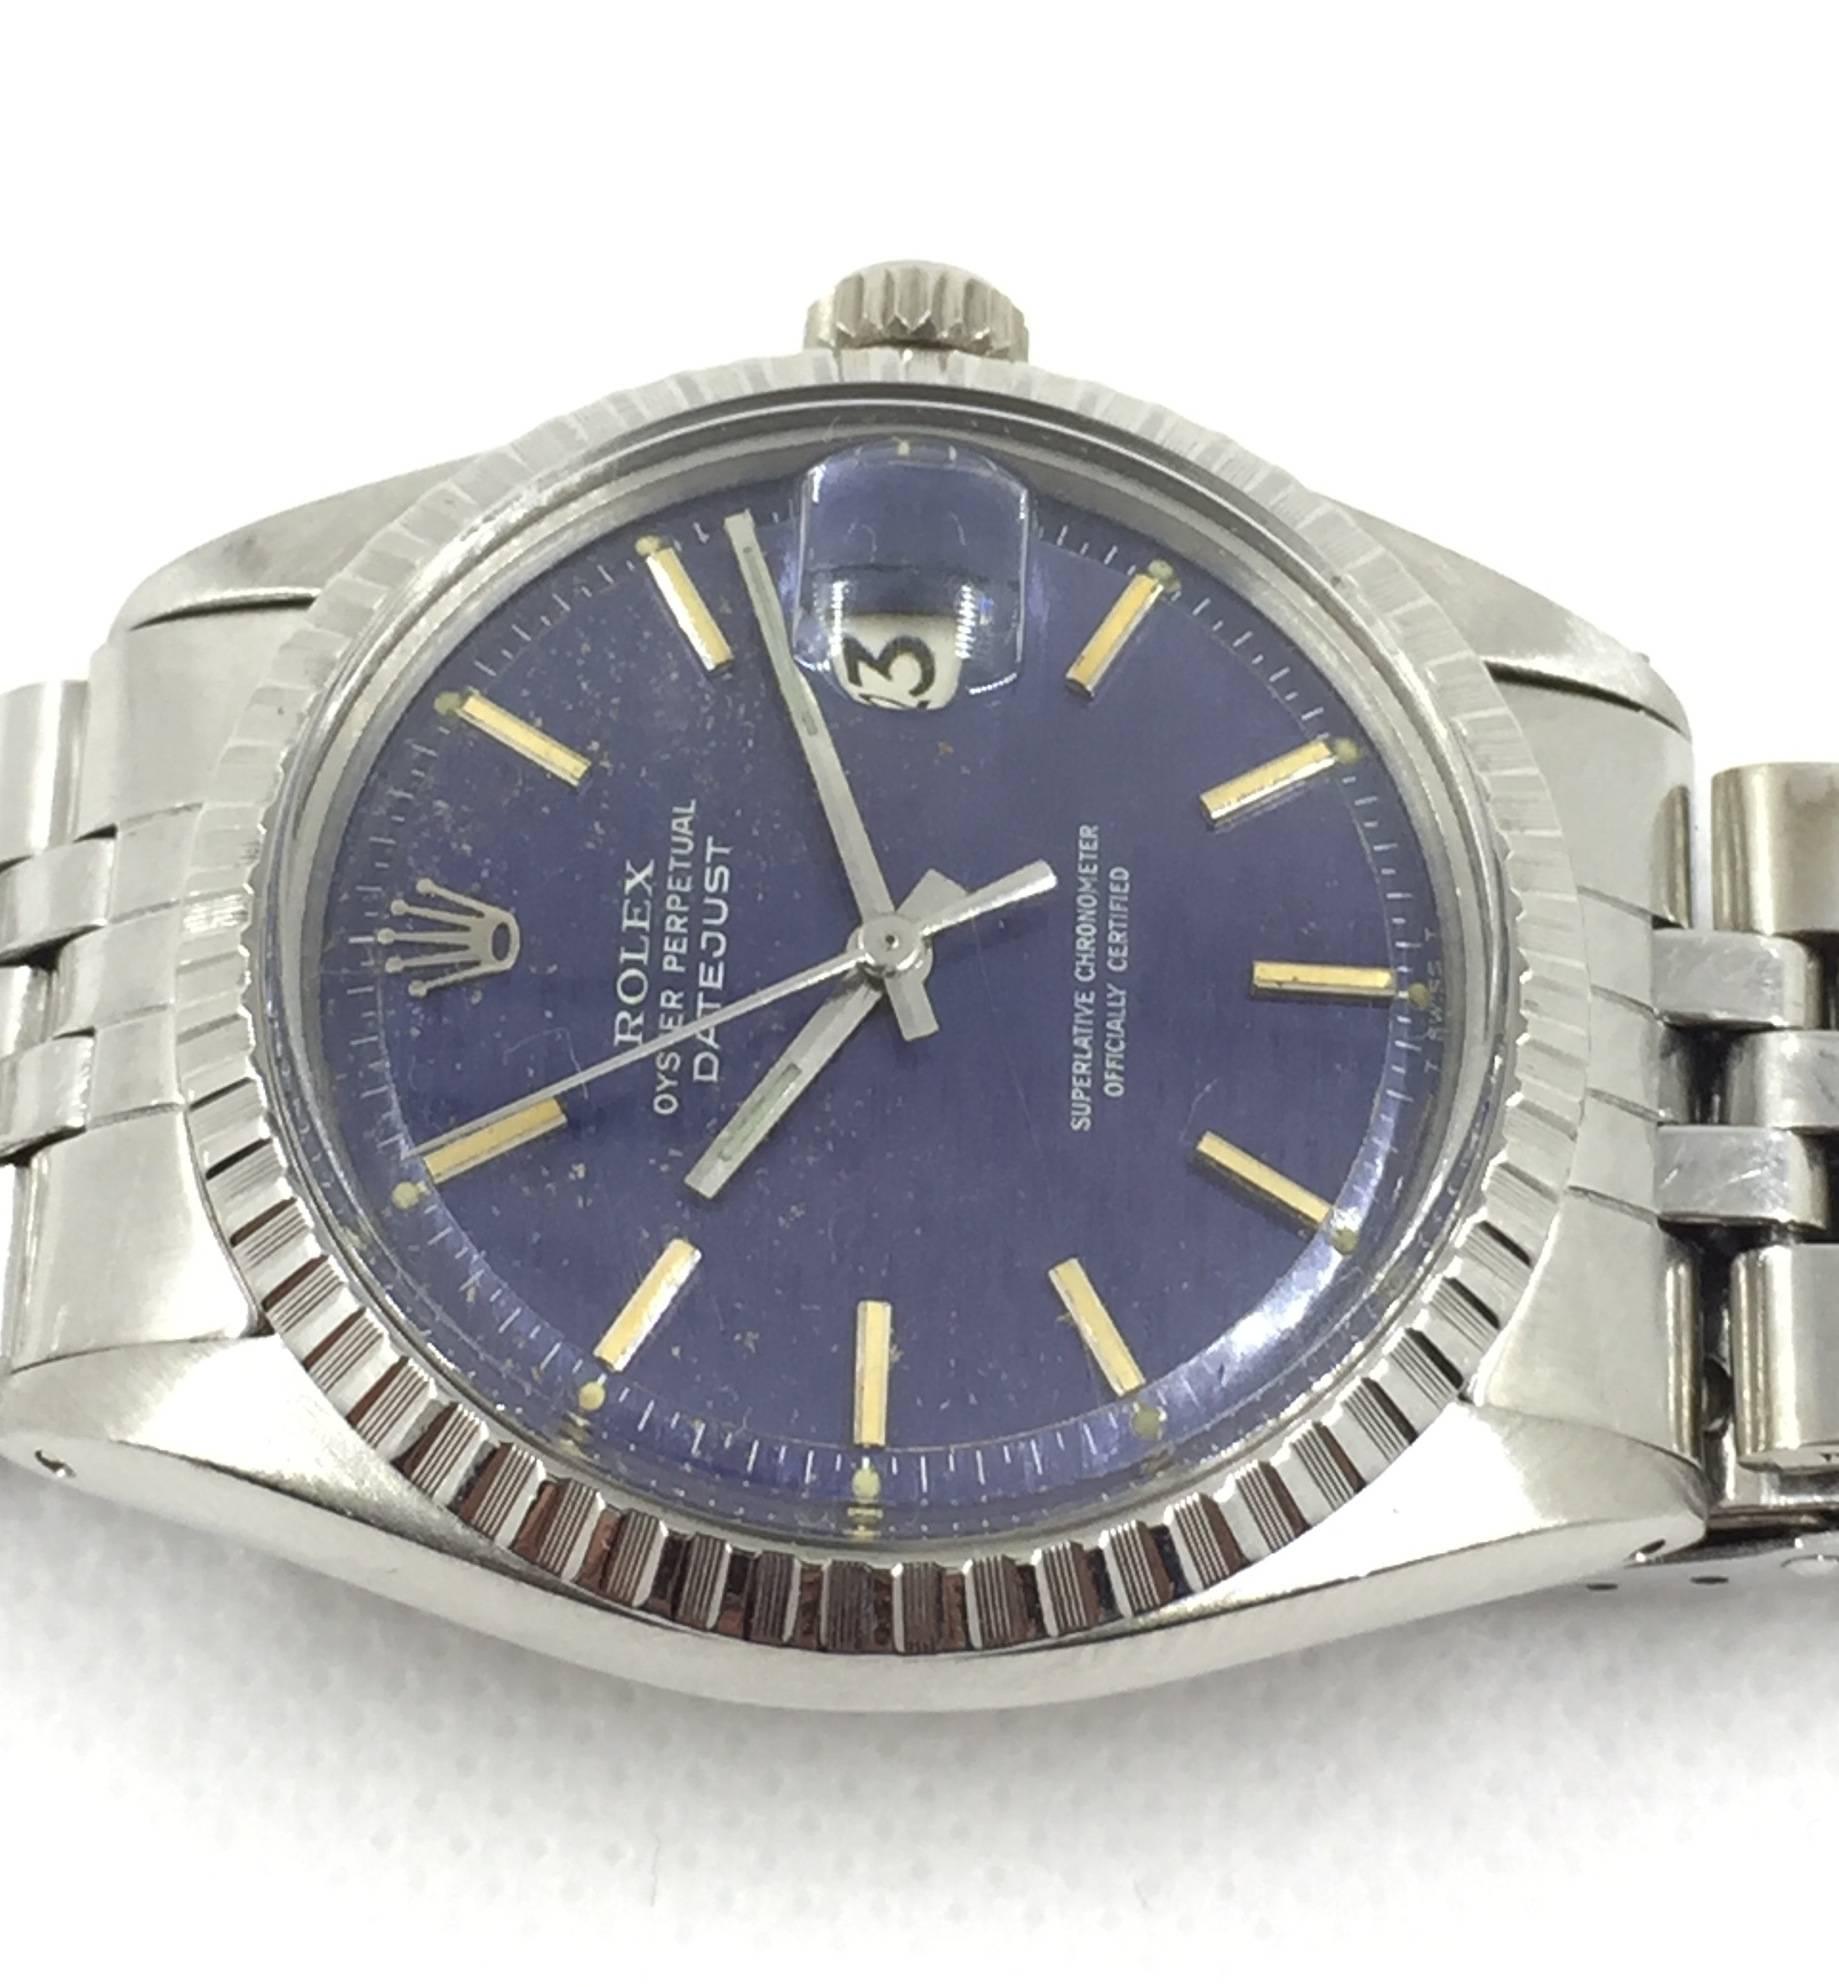 Women's or Men's Rolex Oyster Perpetual Datejust Blue Wave Dial Wristwatch 1970